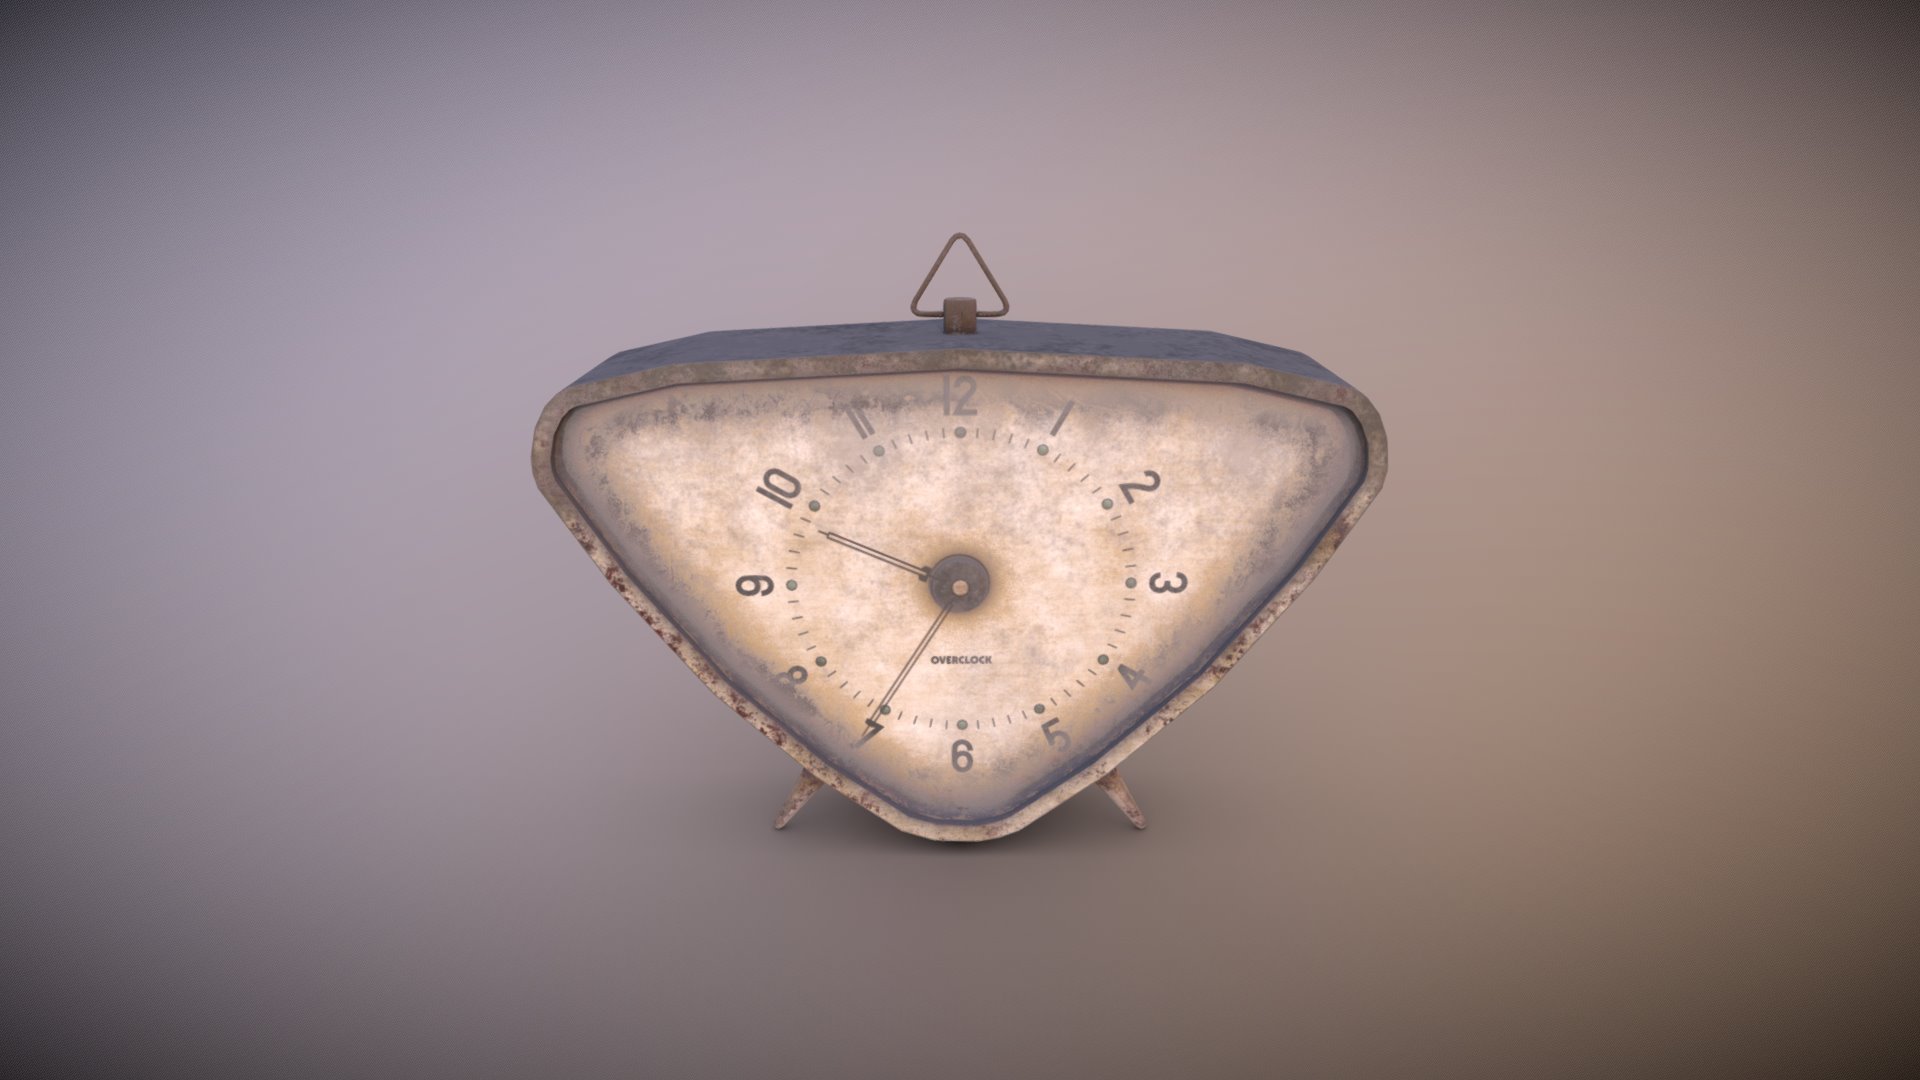 3D model Dirty desktop clock 9 of 20 - This is a 3D model of the Dirty desktop clock 9 of 20. The 3D model is about a round analog clock.